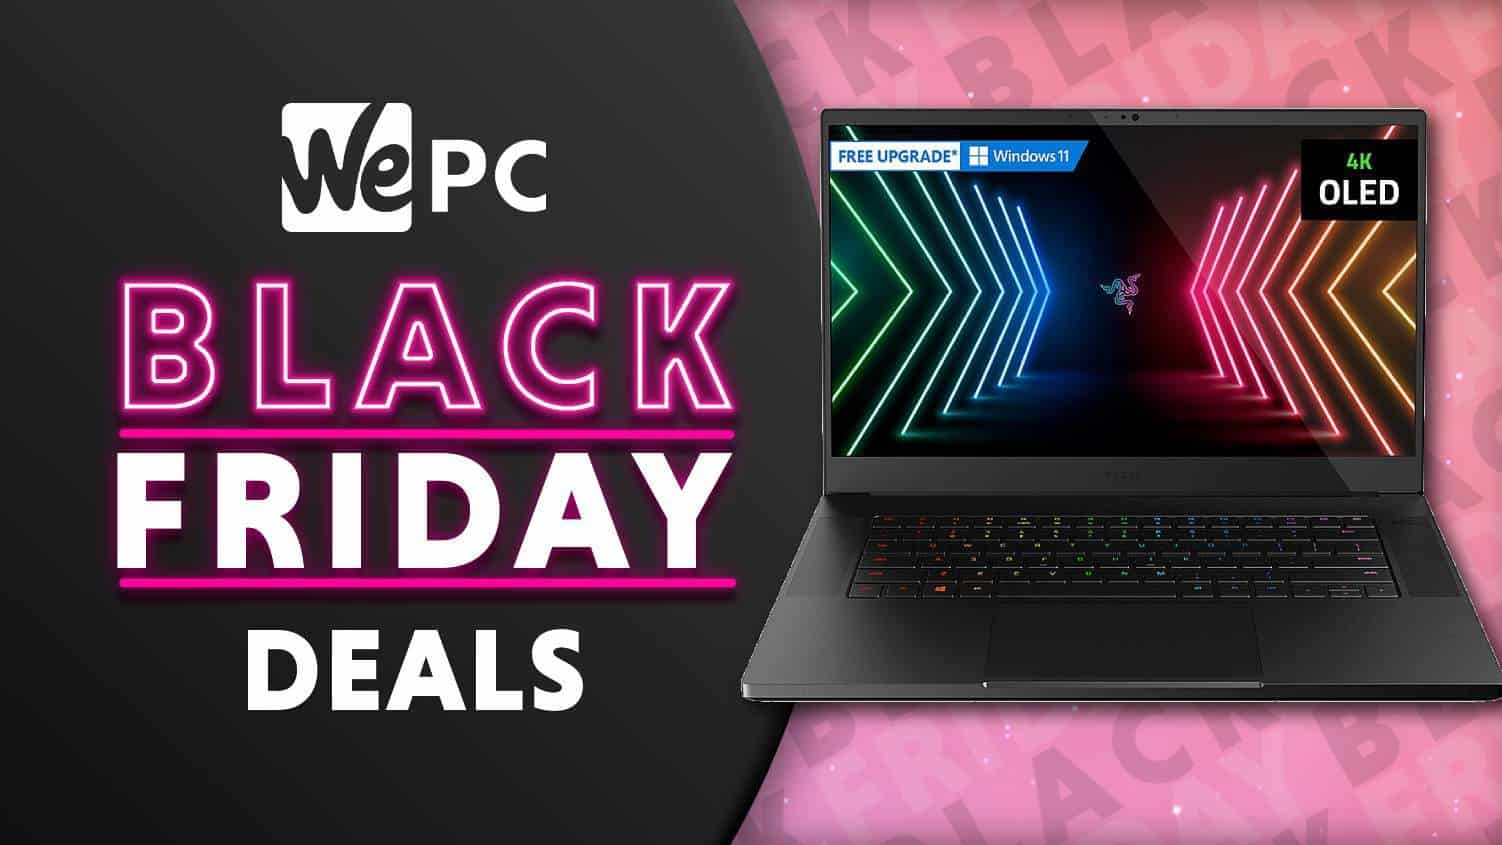 Save $600 on the Razer Blade 15 gaming laptop – early Black Friday deals